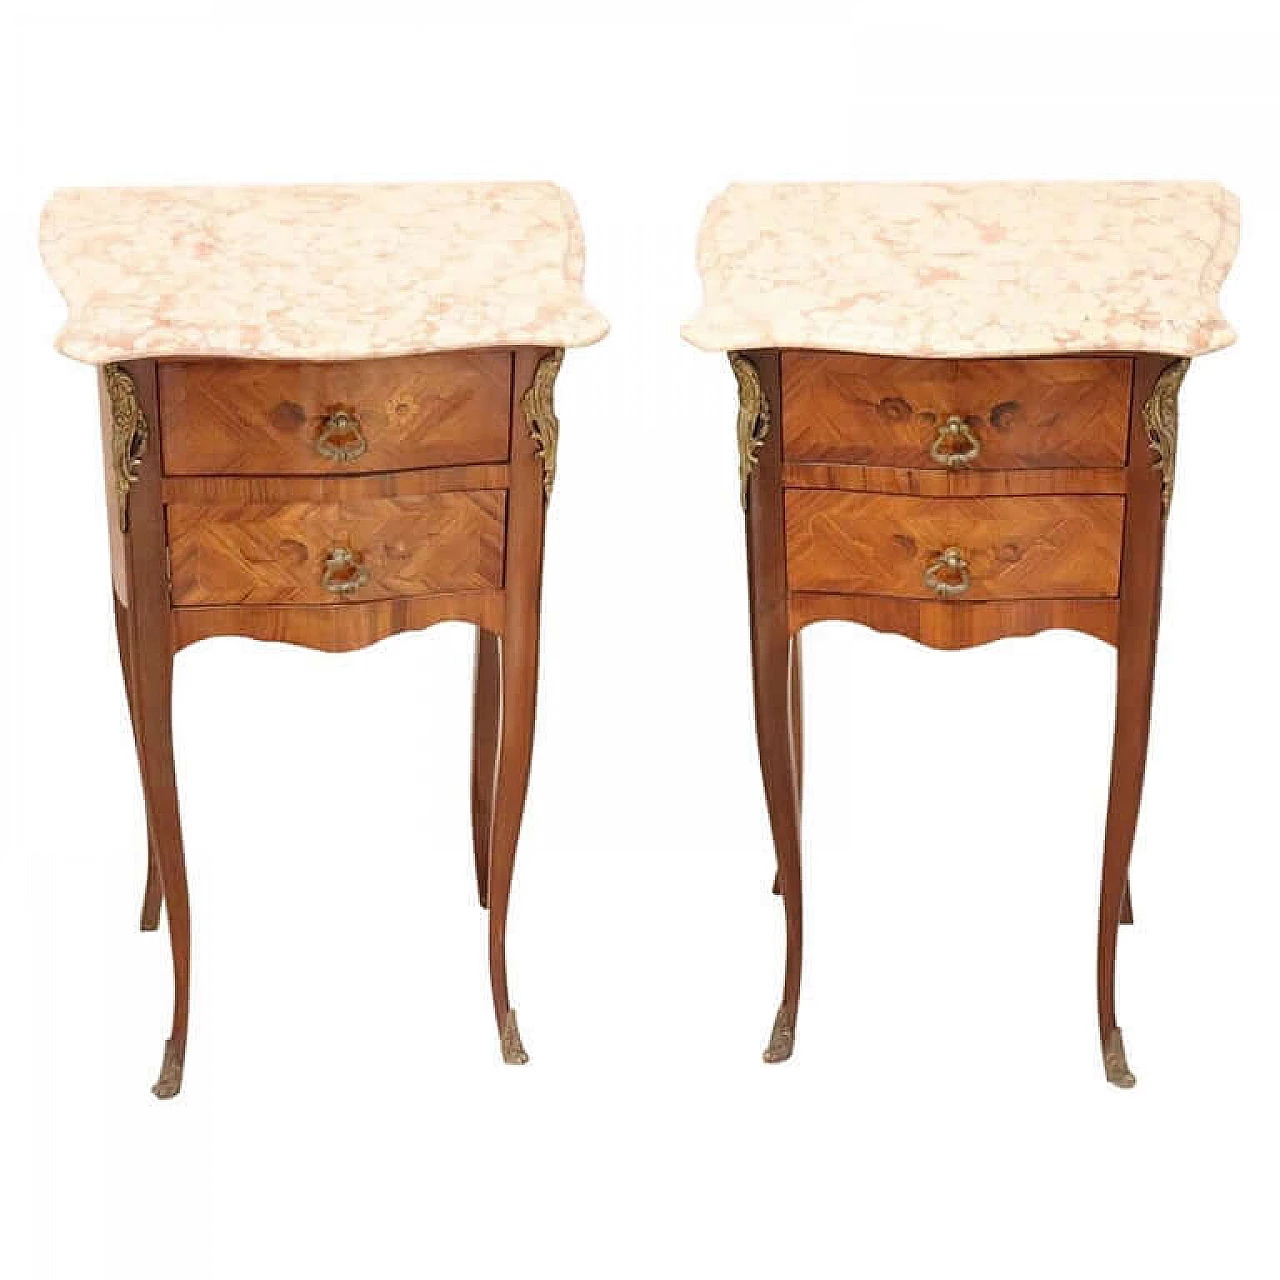 Elegant pair of bedside tables in antique Louis XV style inlays and gilded bronzes 1087172